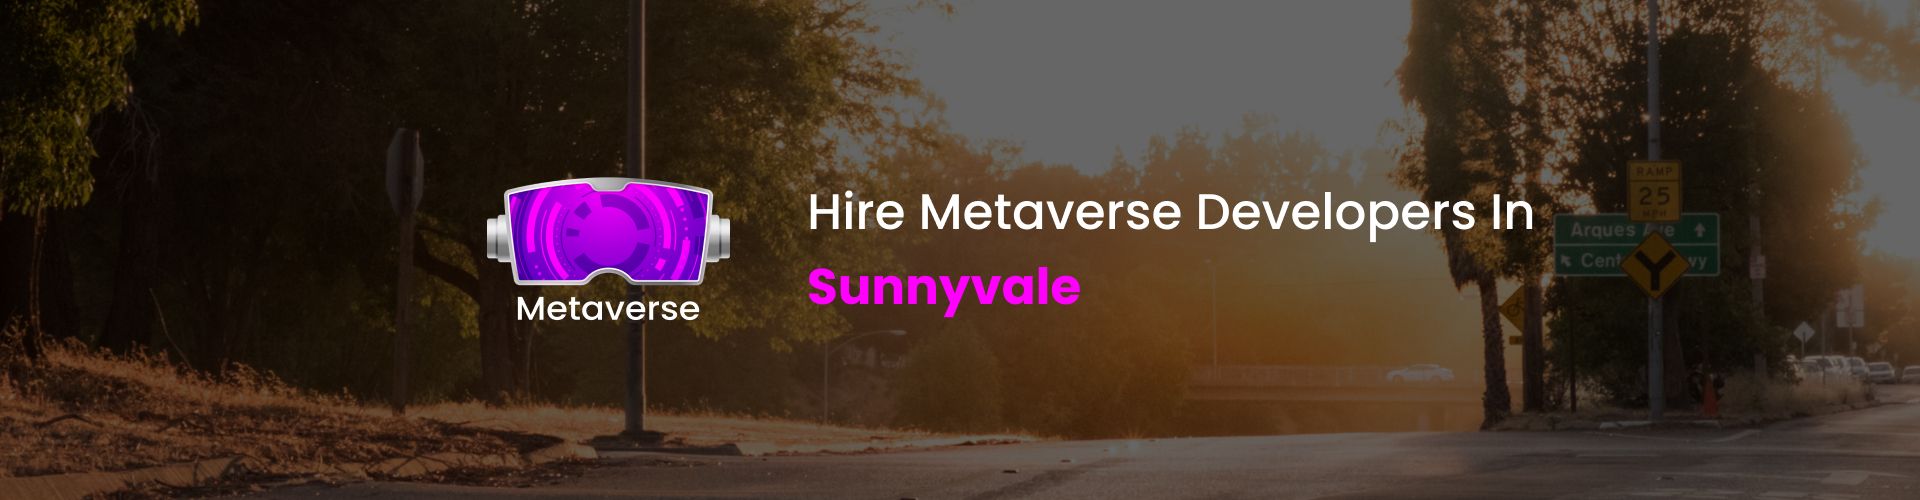 hire metaverse developers in sunnyvale